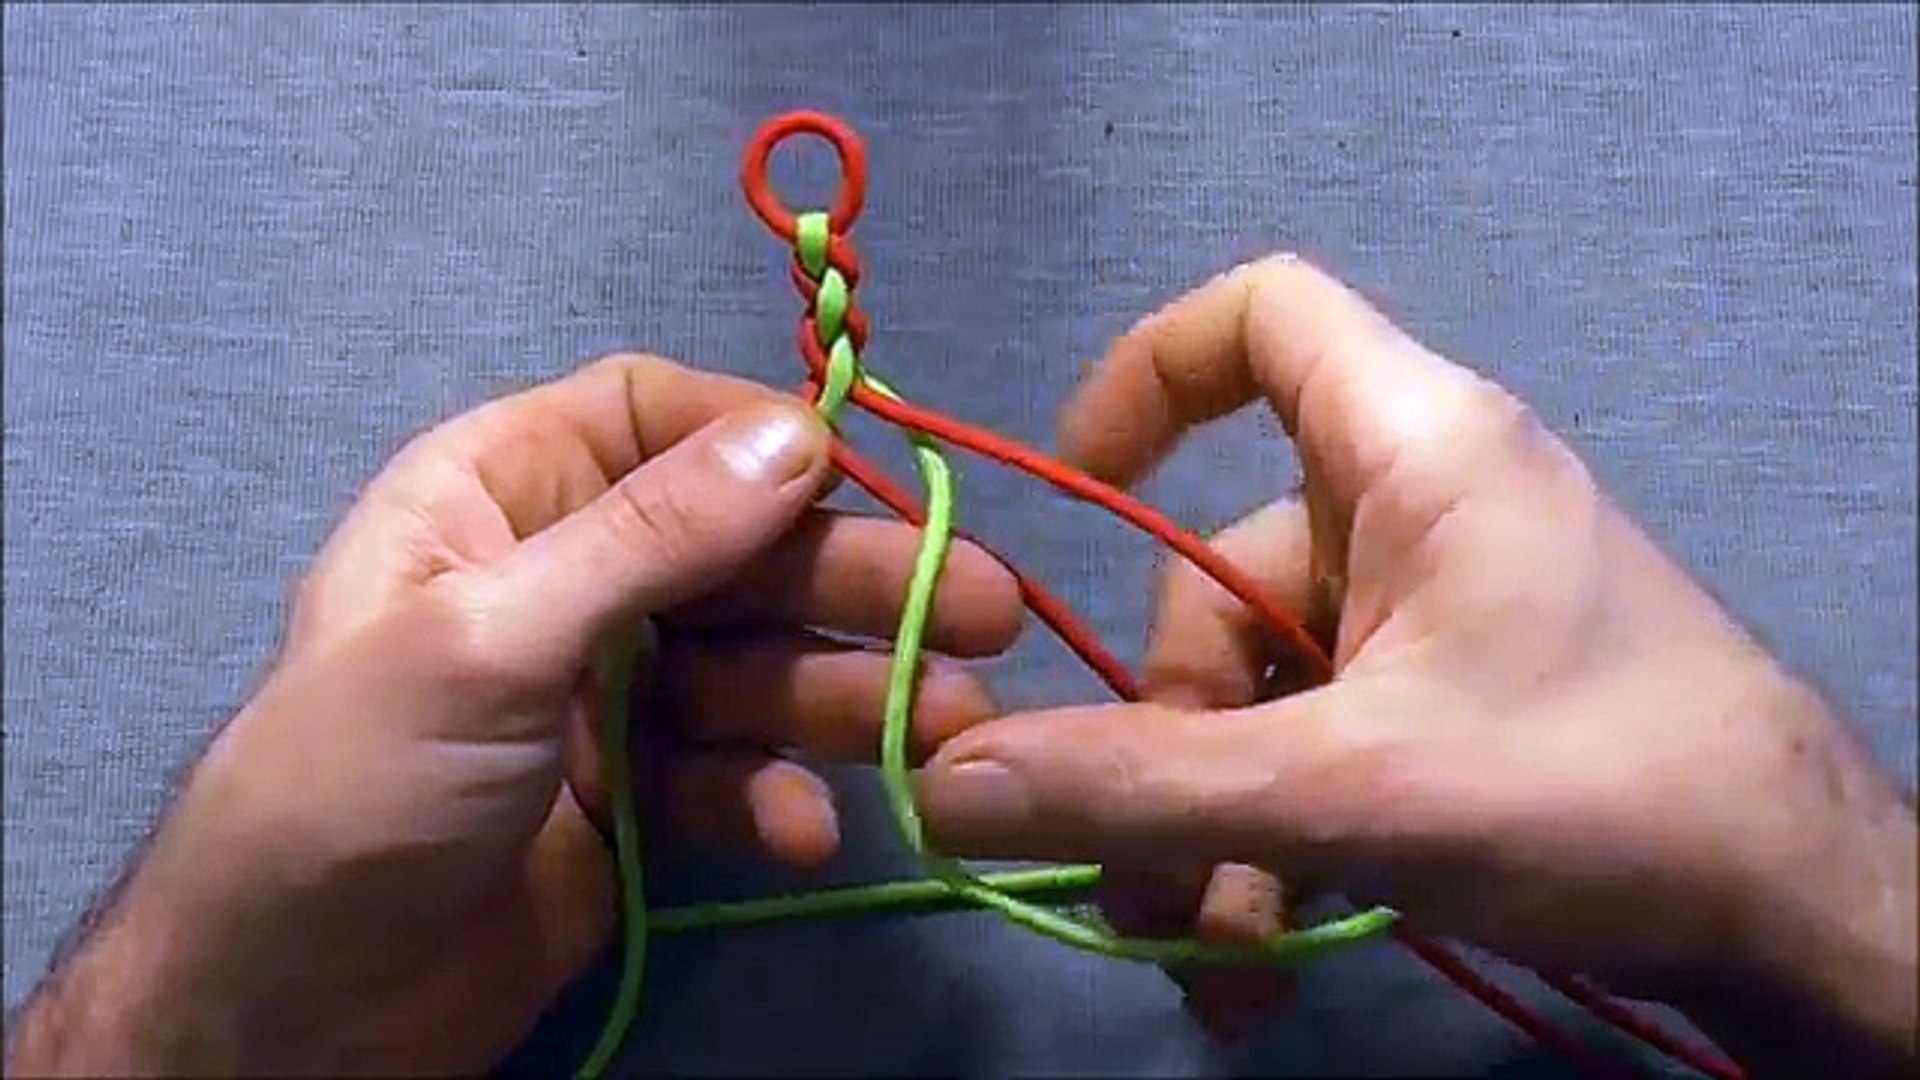 How To Tie A Four Strand Round Braid Paracord Survival Bracelet – Видео  Dailymotion